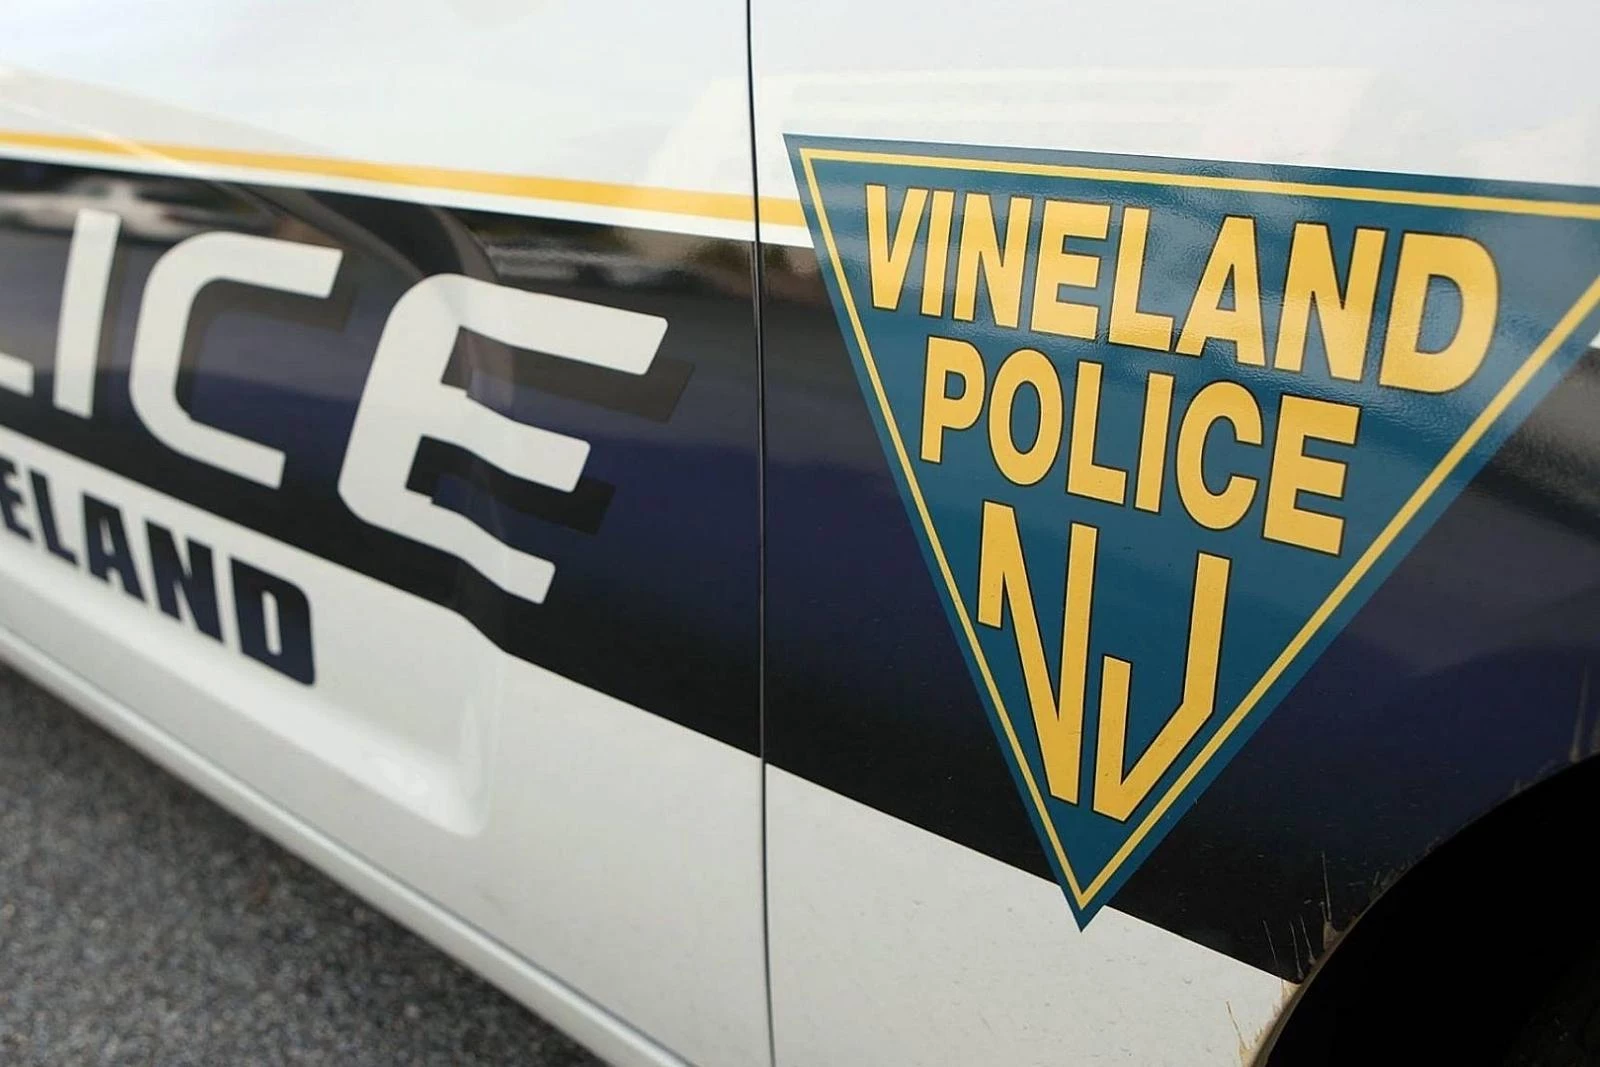 Jurors: Vineland, NJ police didn't violate rights of man who died